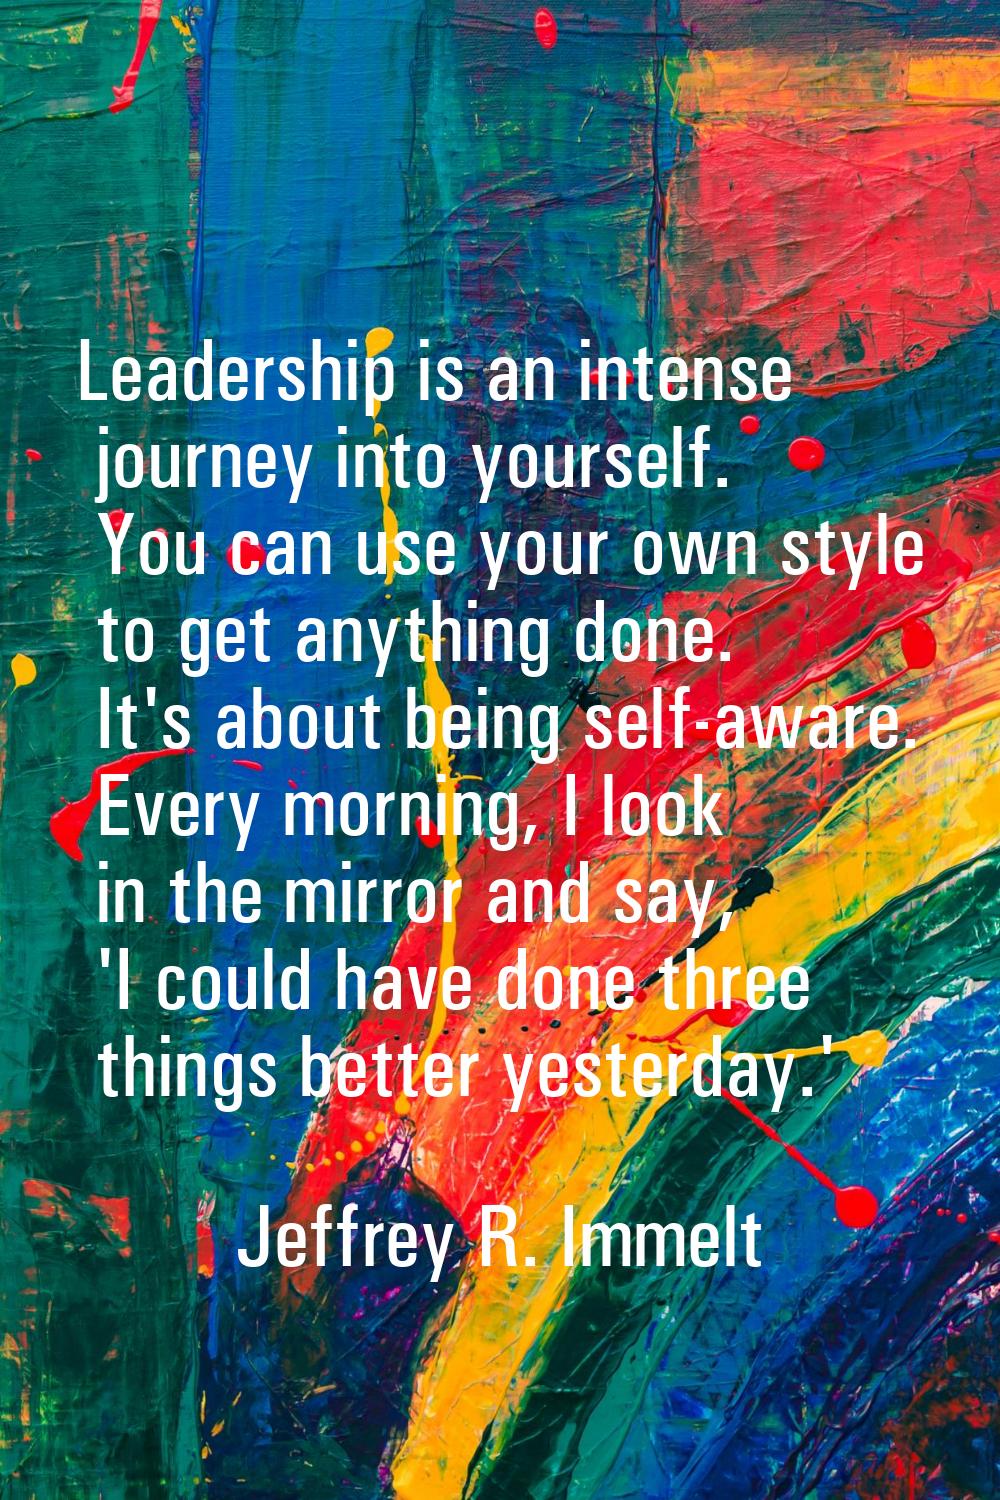 Leadership is an intense journey into yourself. You can use your own style to get anything done. It